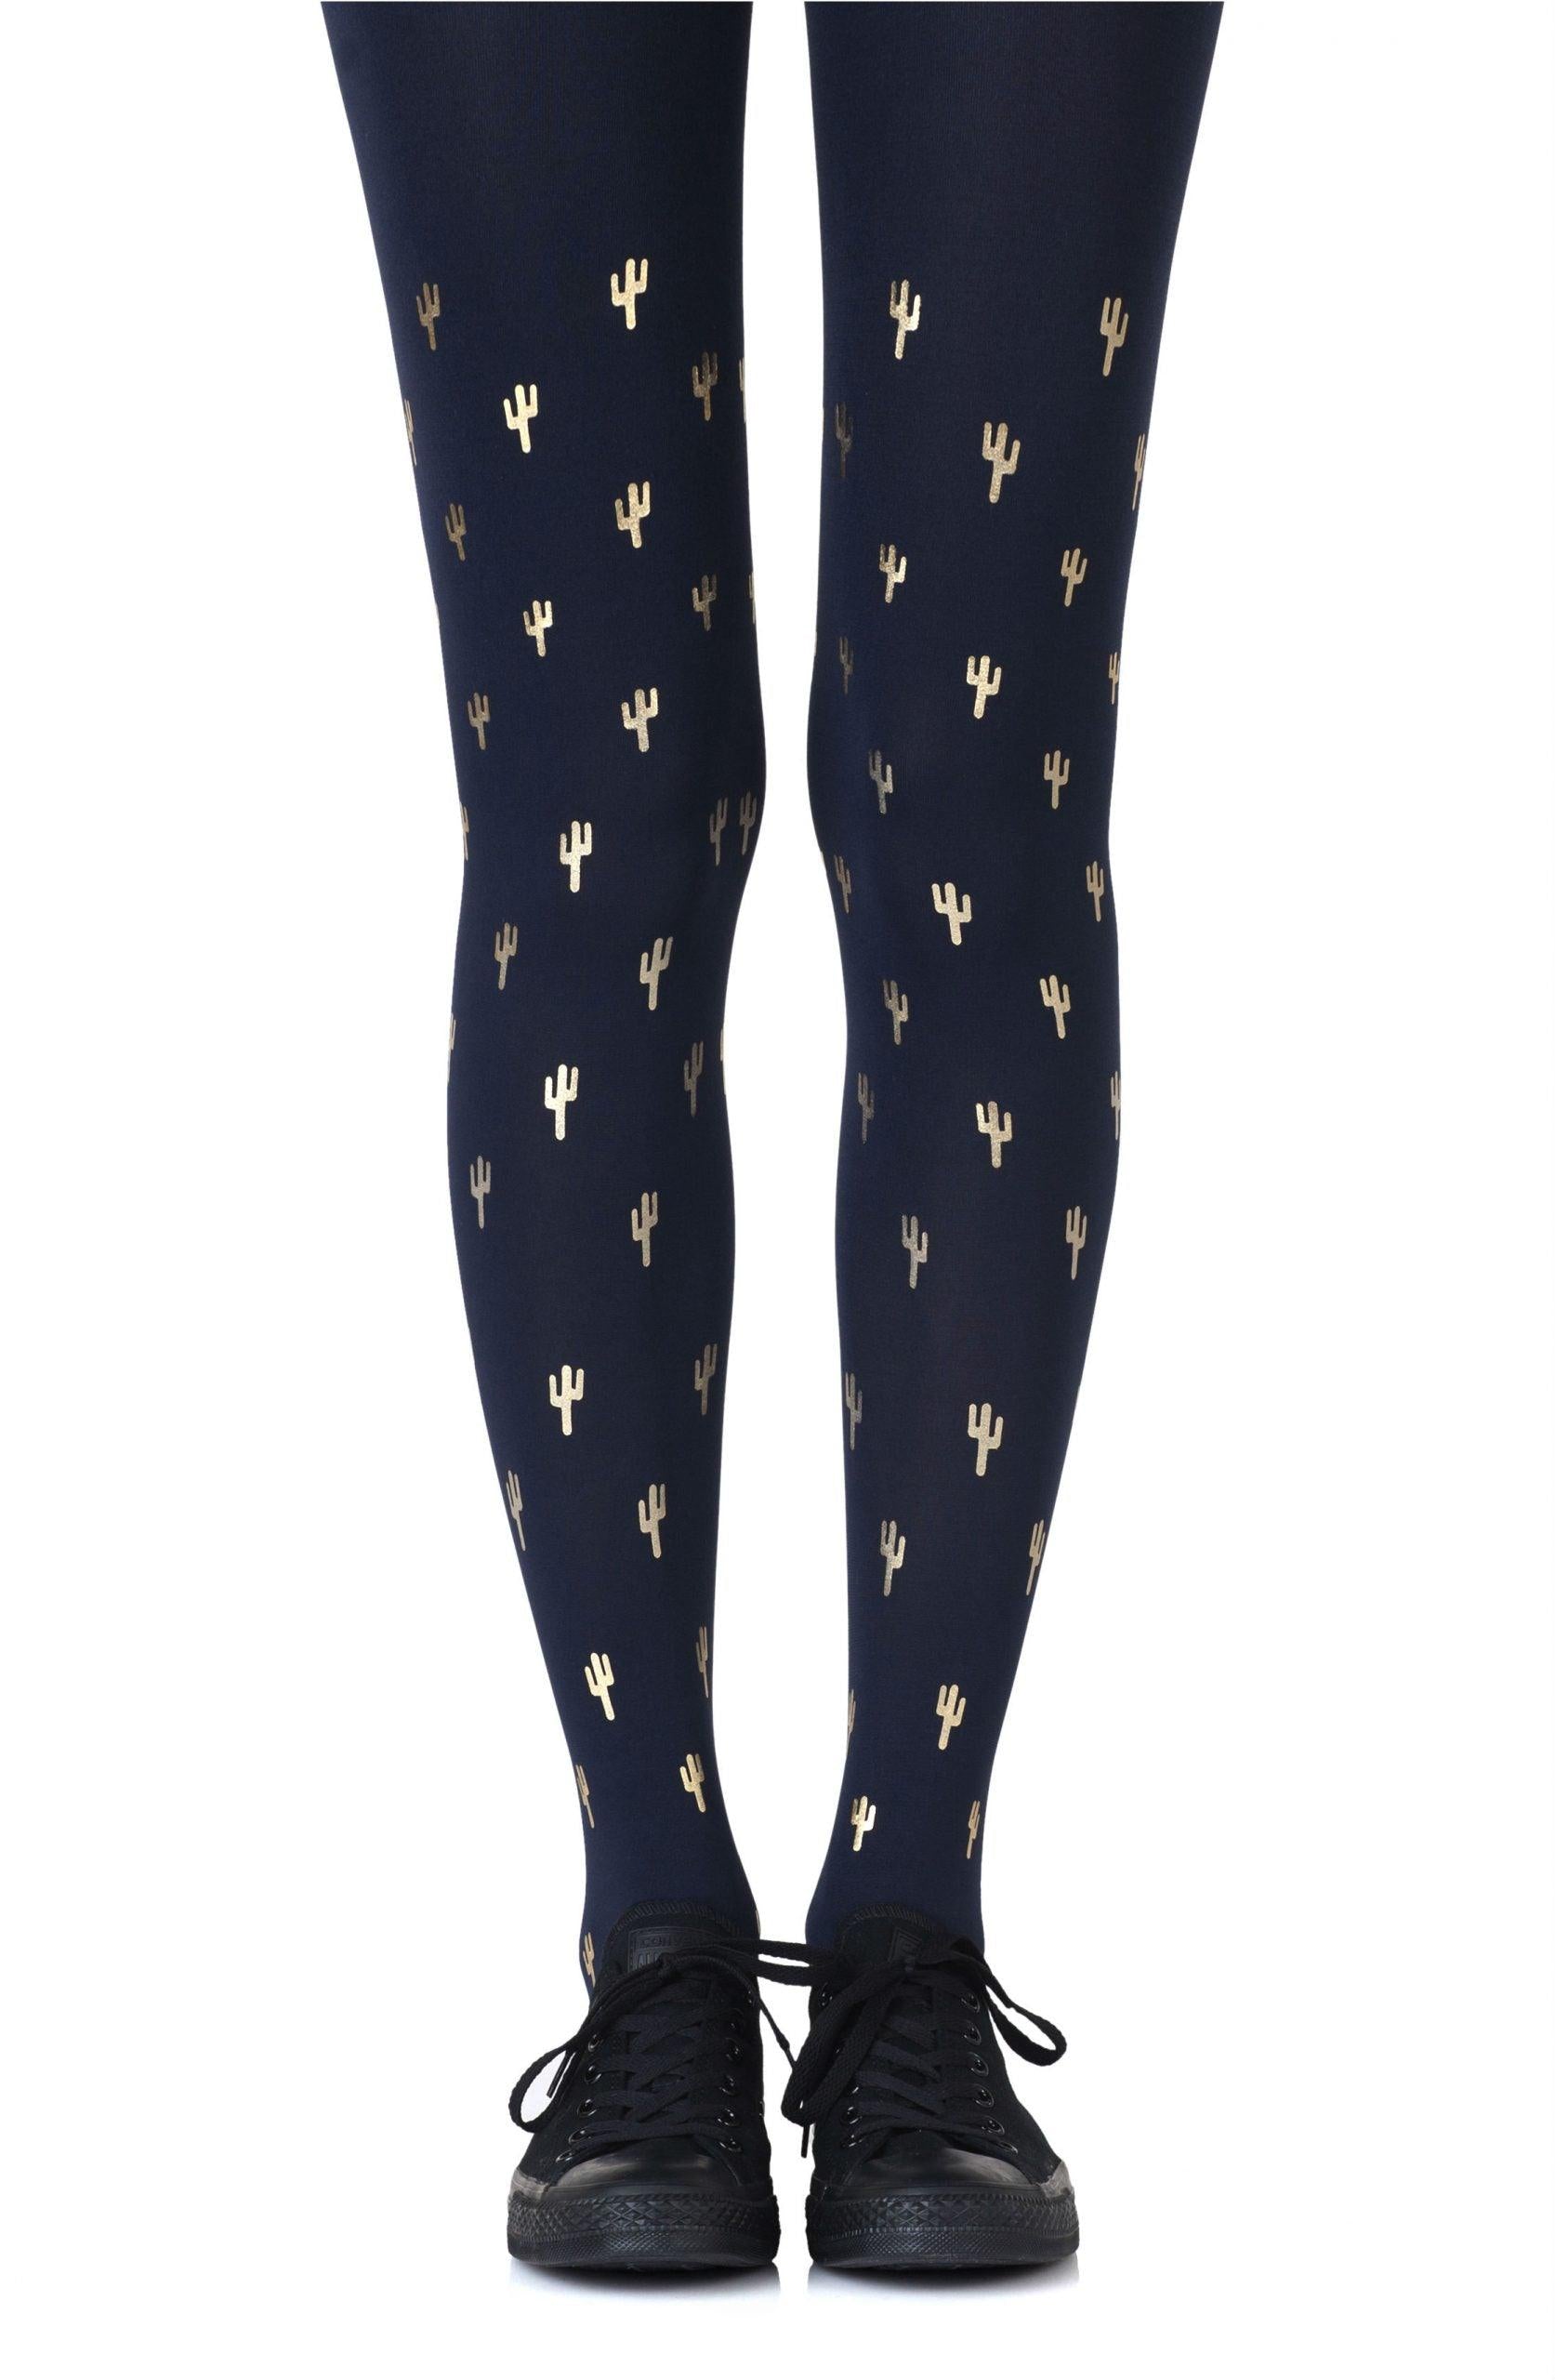 Zohara &quot;Prickly Pear&quot; Gold Print Tights - Sydney Rose Lingerie 